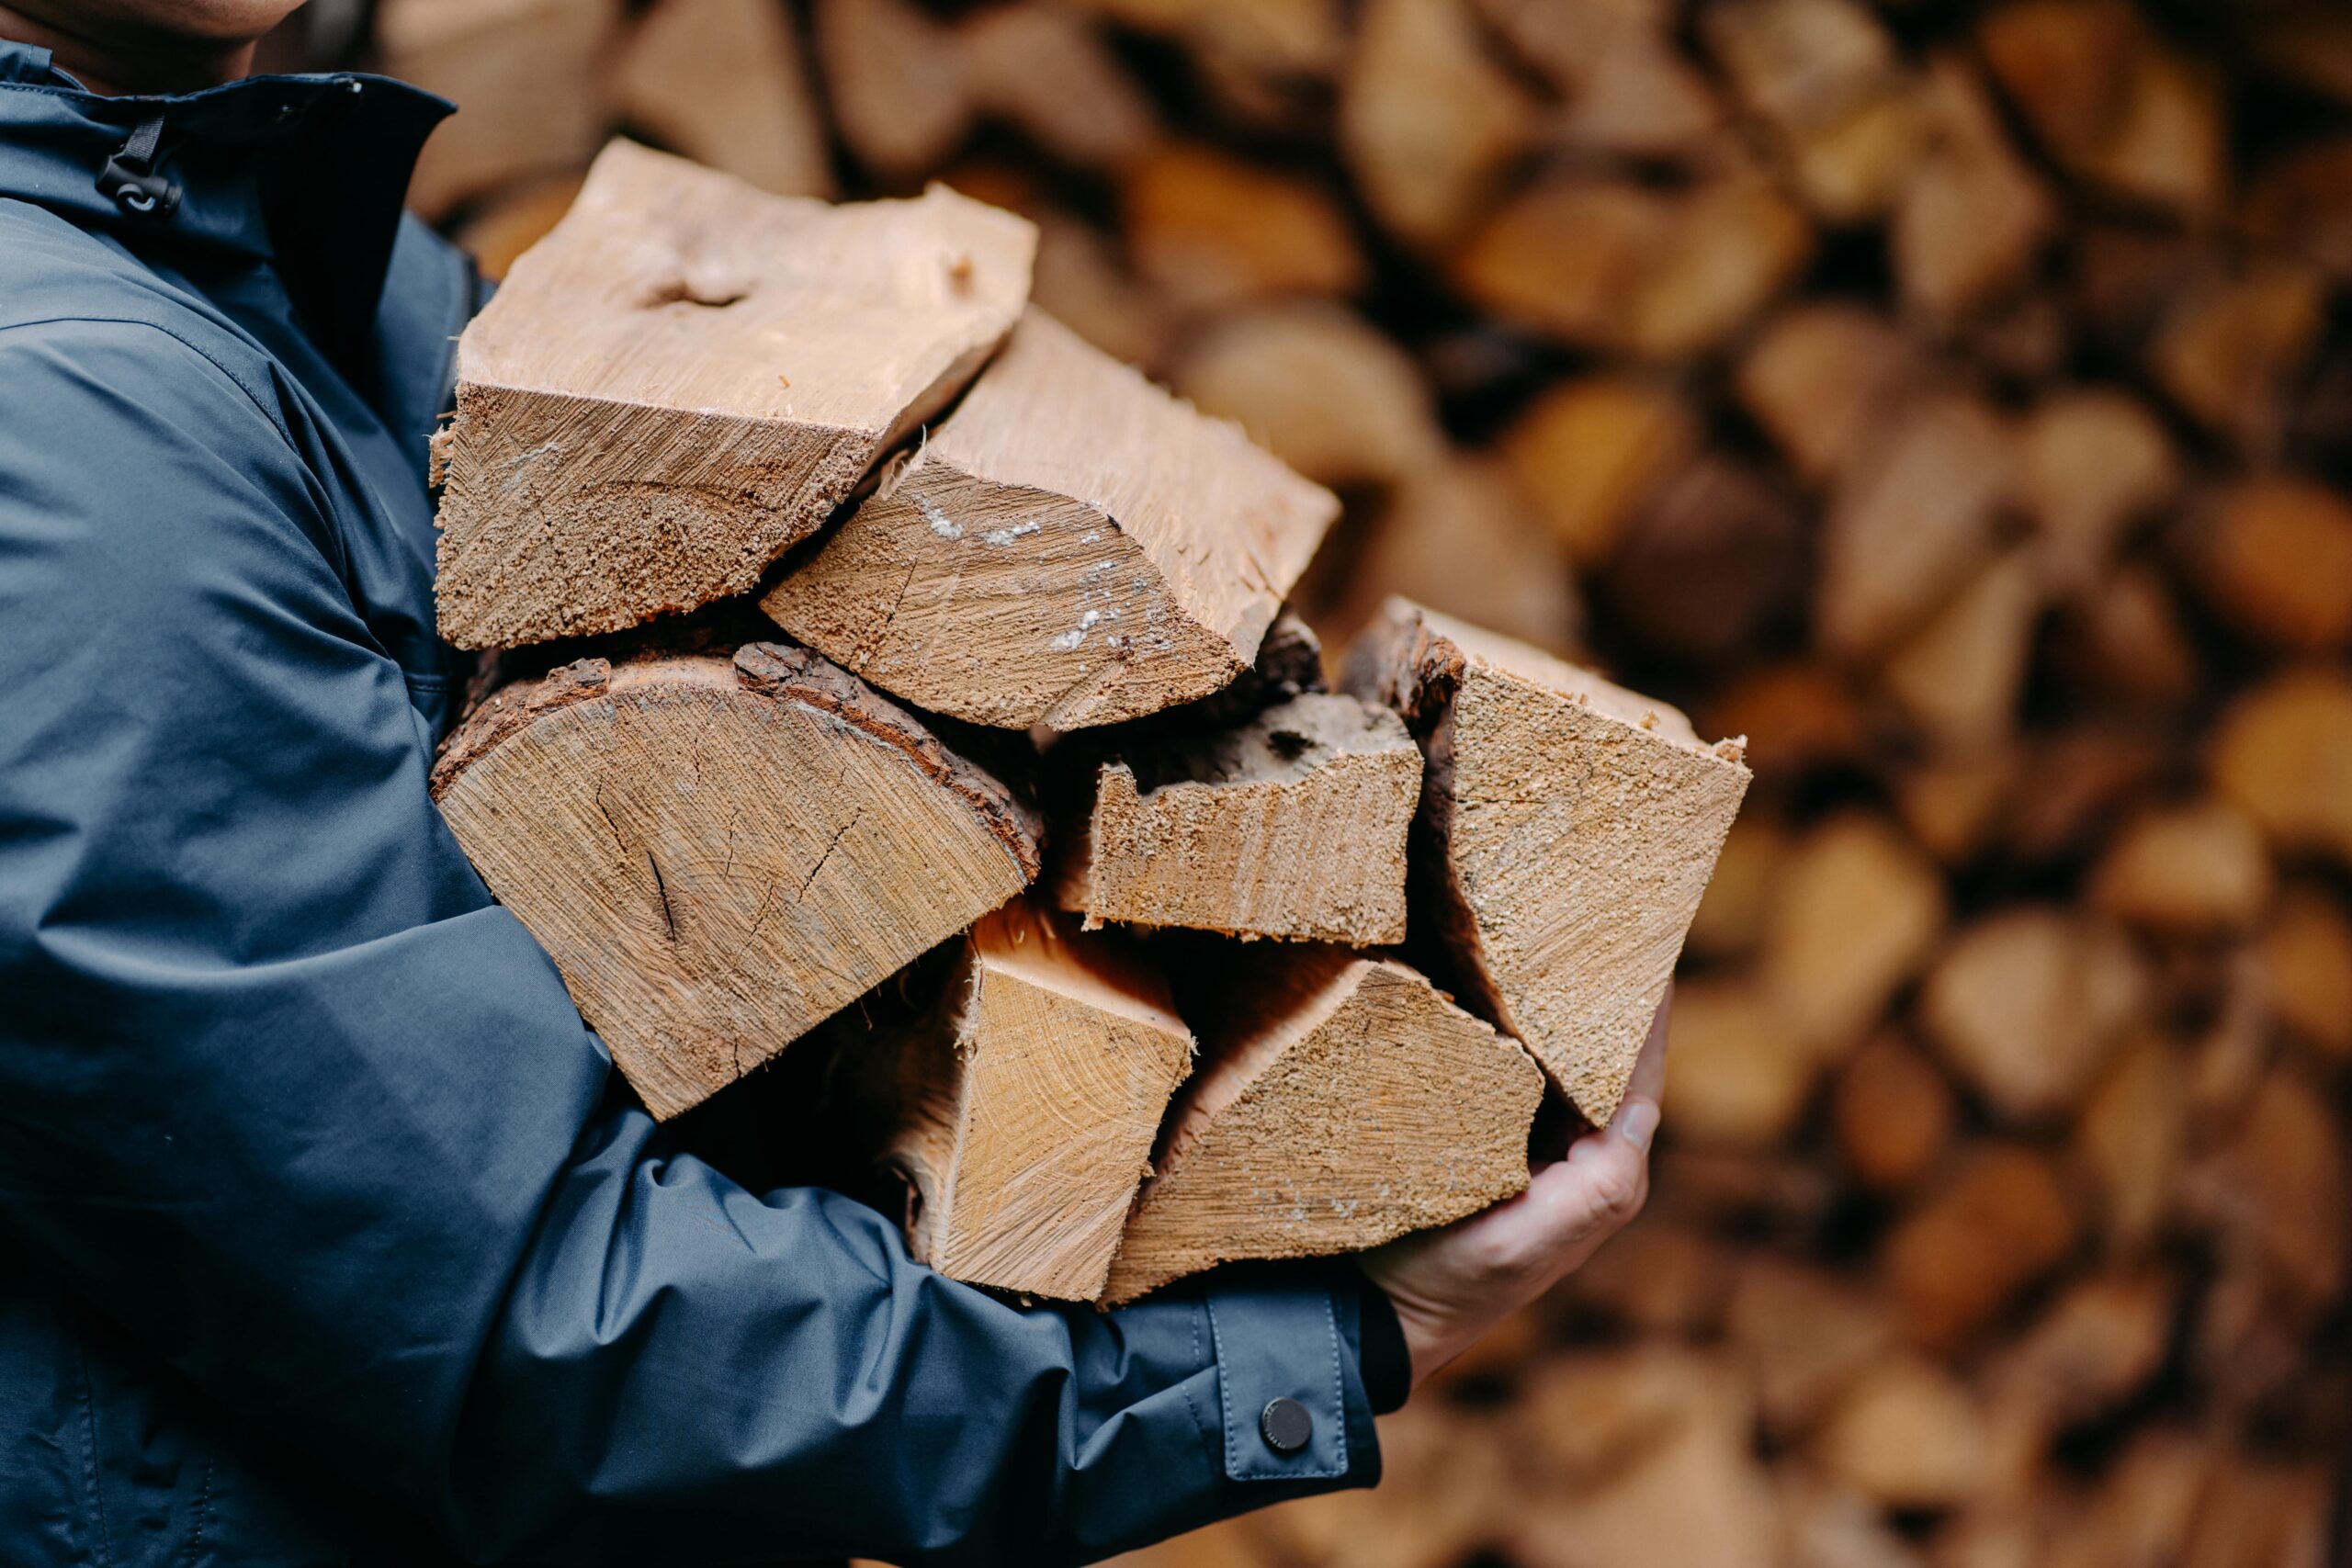 Man carrying firewood by county logs and coal